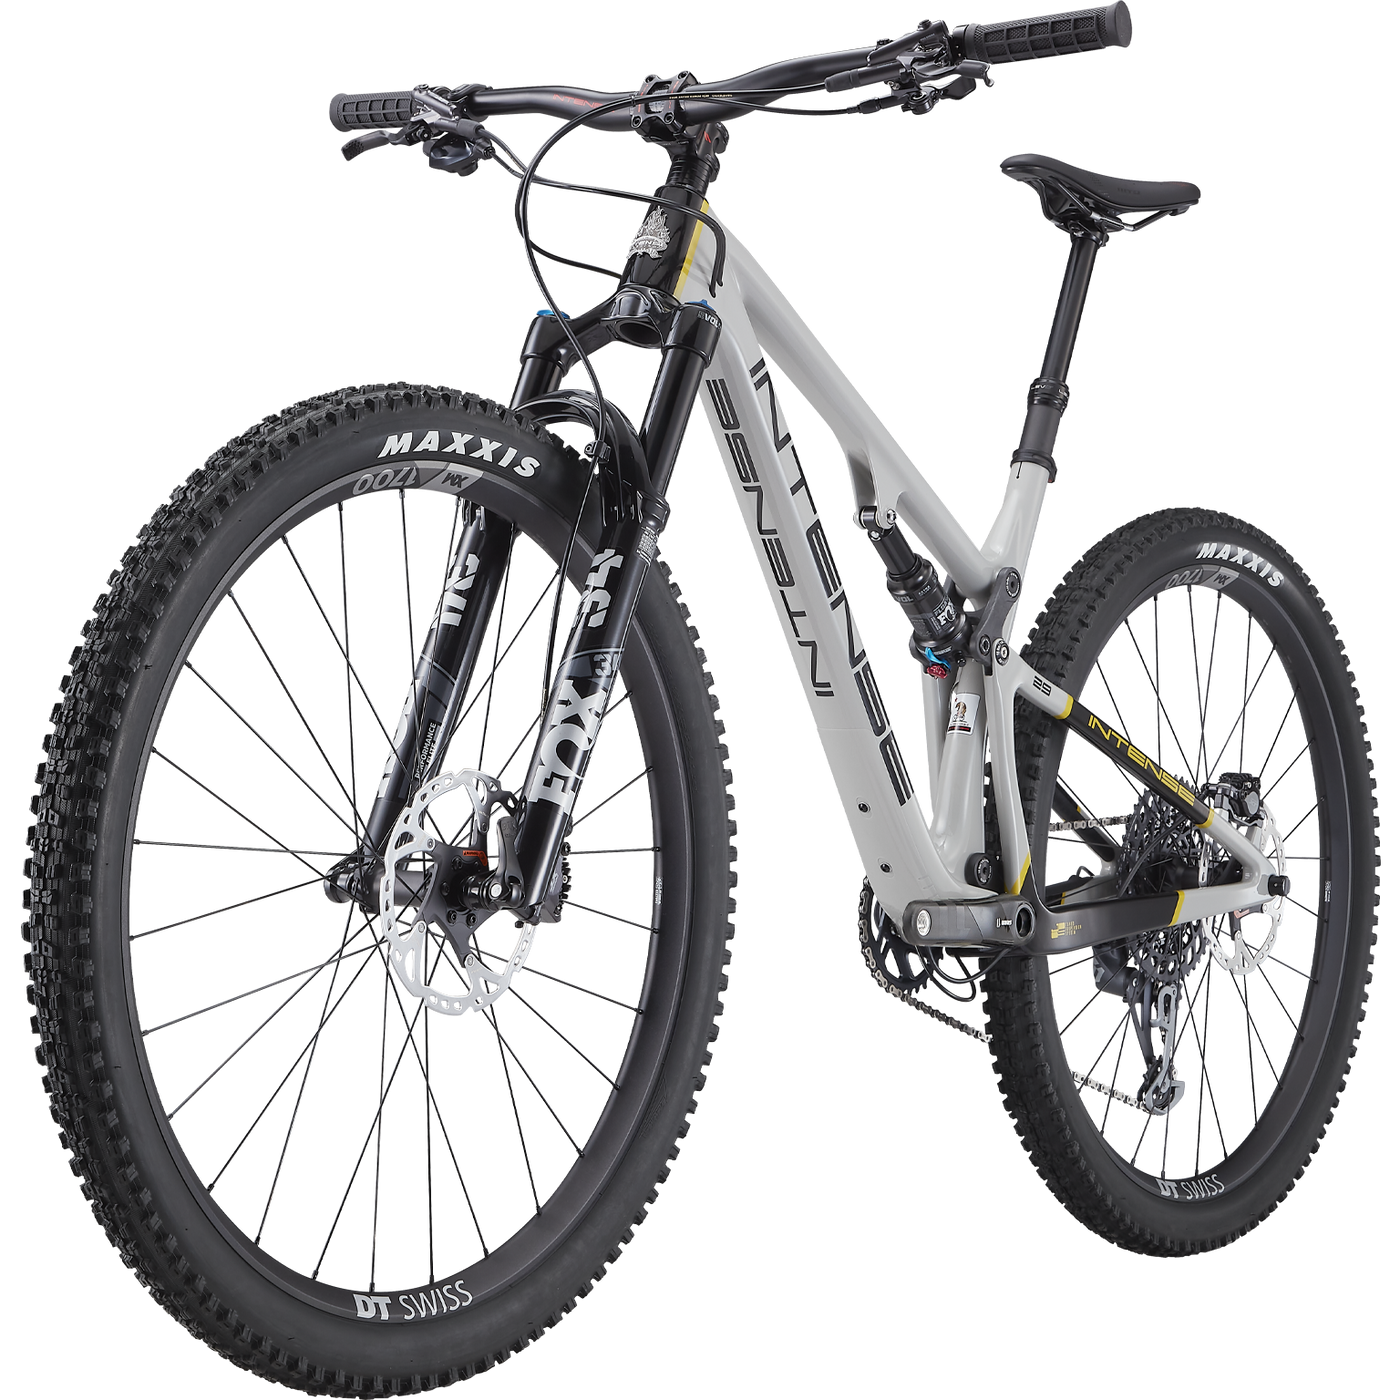 Shop INTENSE Carbon Mountain Bike for sale online or at a retailer